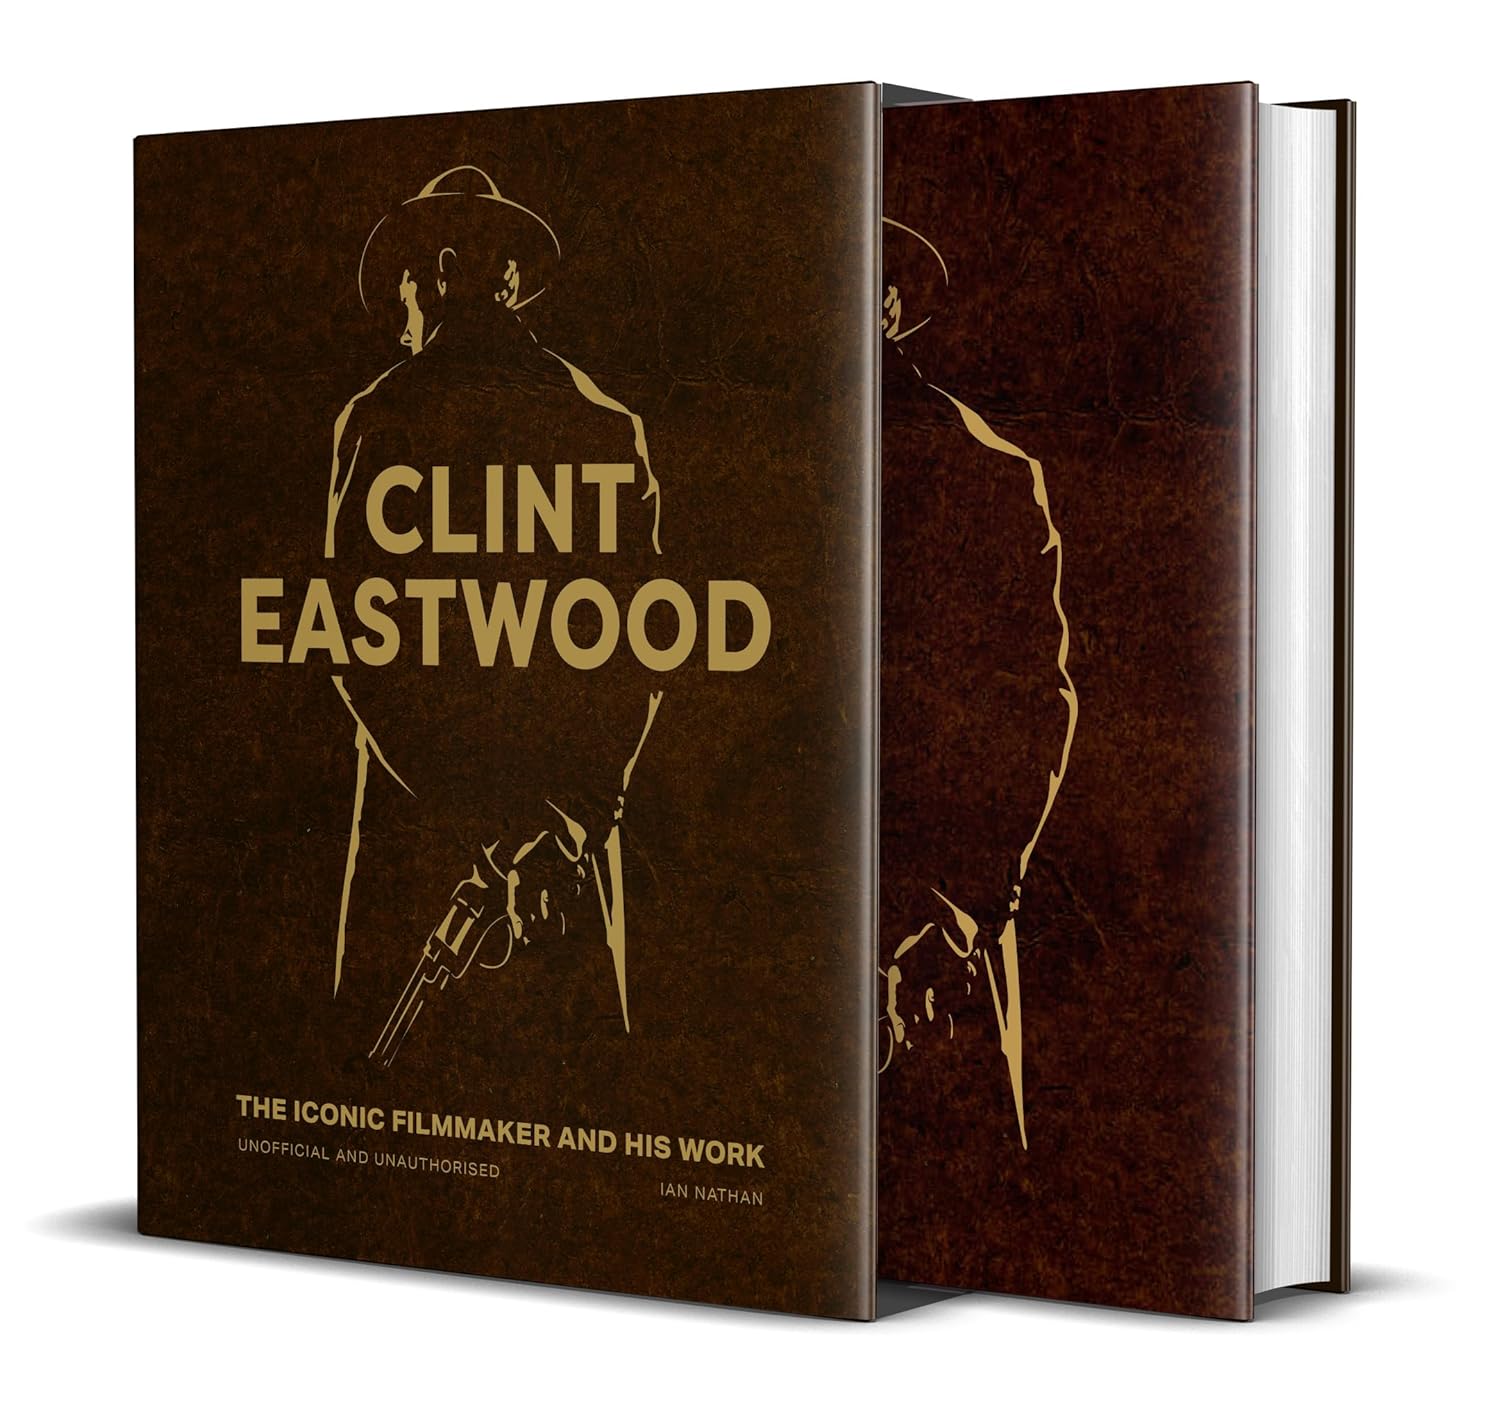 Clint Eastwood: The Iconic Filmmaker and his Work